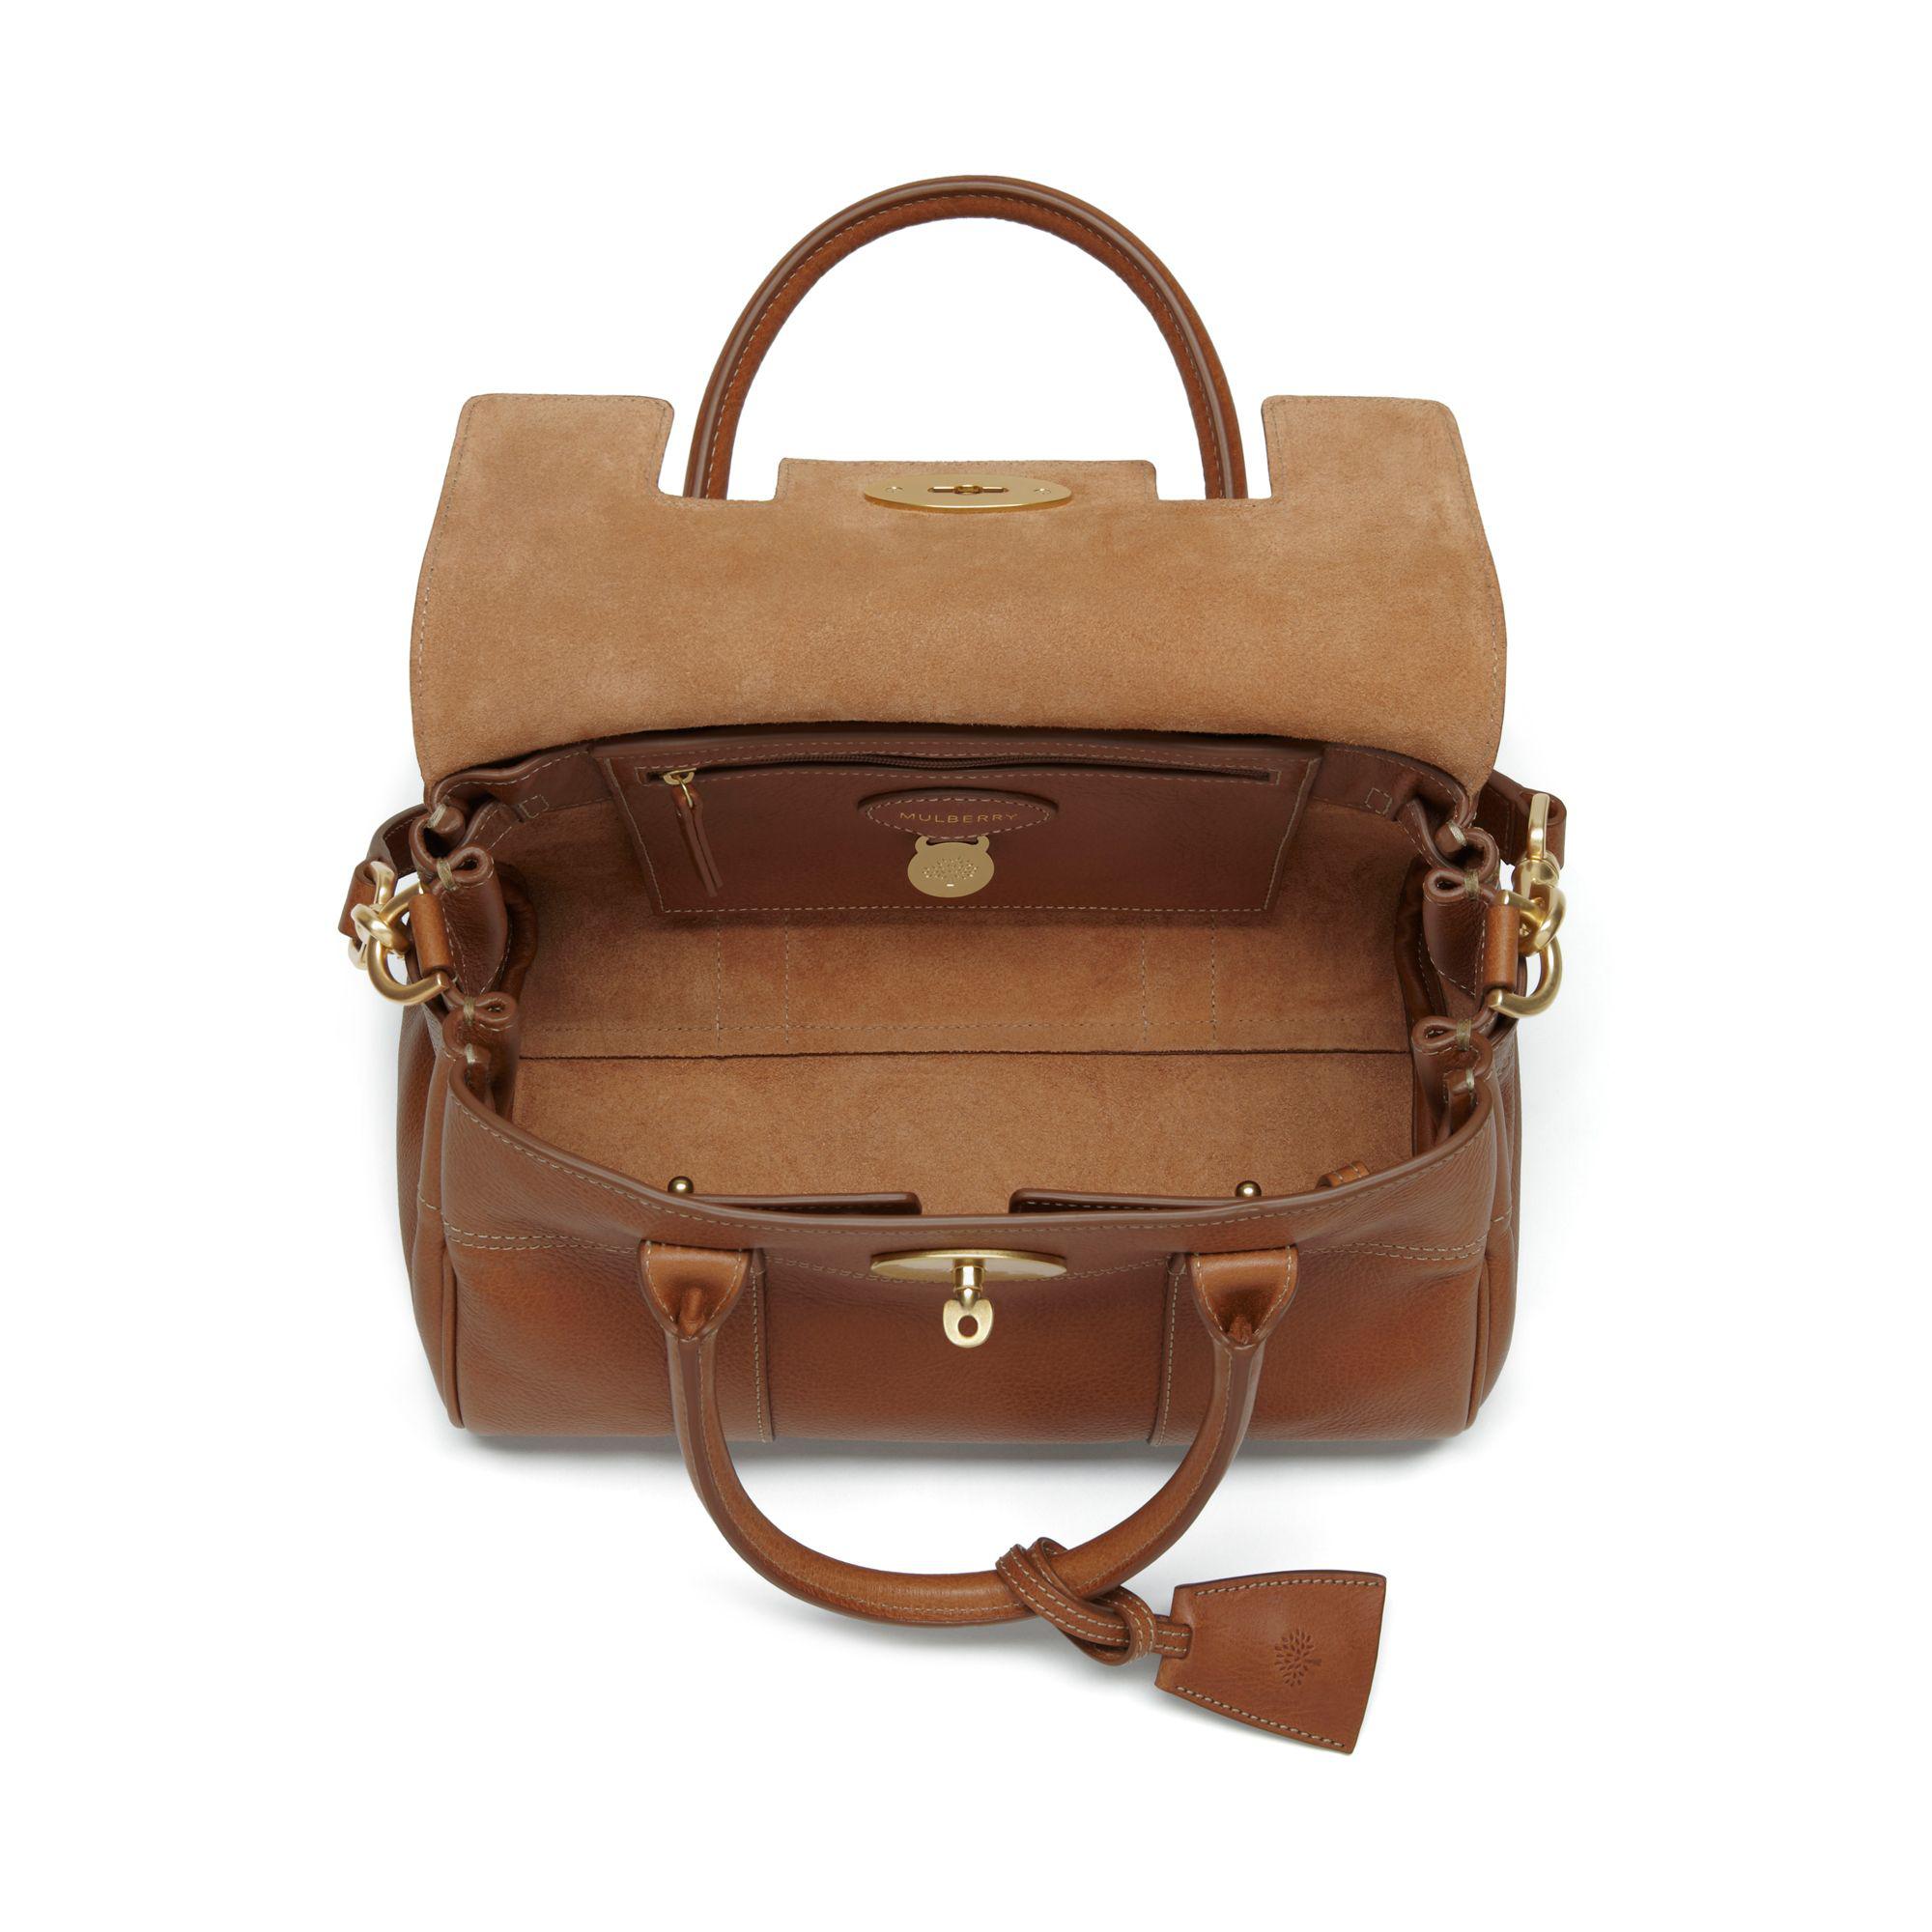 Mulberry Small Bayswater Leather Satchel in Oak (Brown) - Lyst